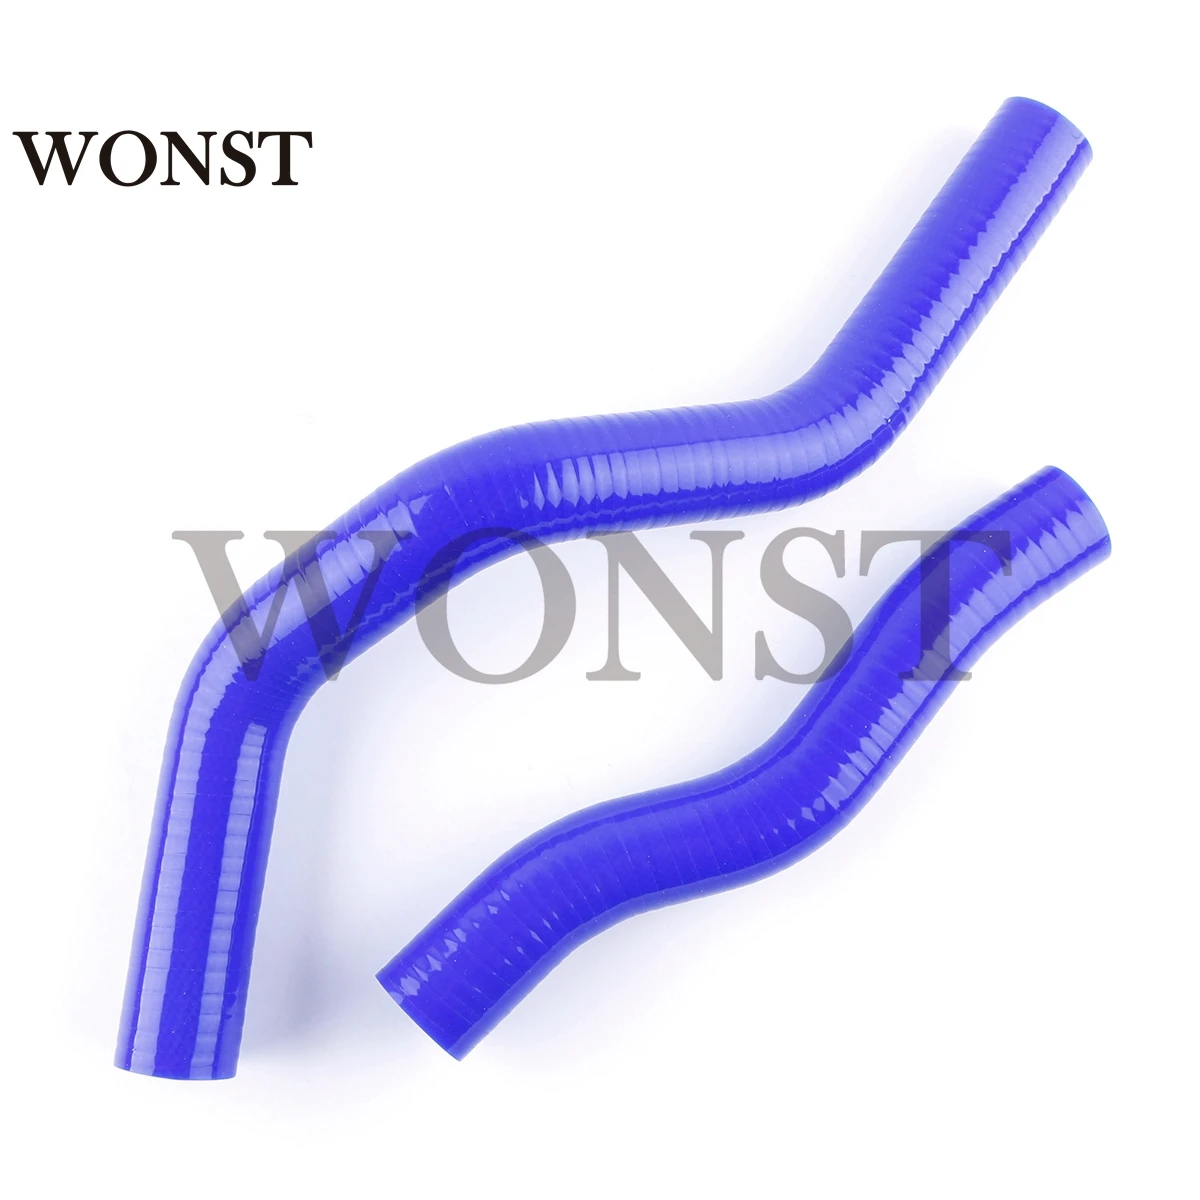 

SILICONE RADIATOR HOSE For CIVIC FD1 DX/EX/LX/SI R18A K20Z/ACURA RSX 1.8L/2.0L 2006 2007 2008 2009 2010 2011